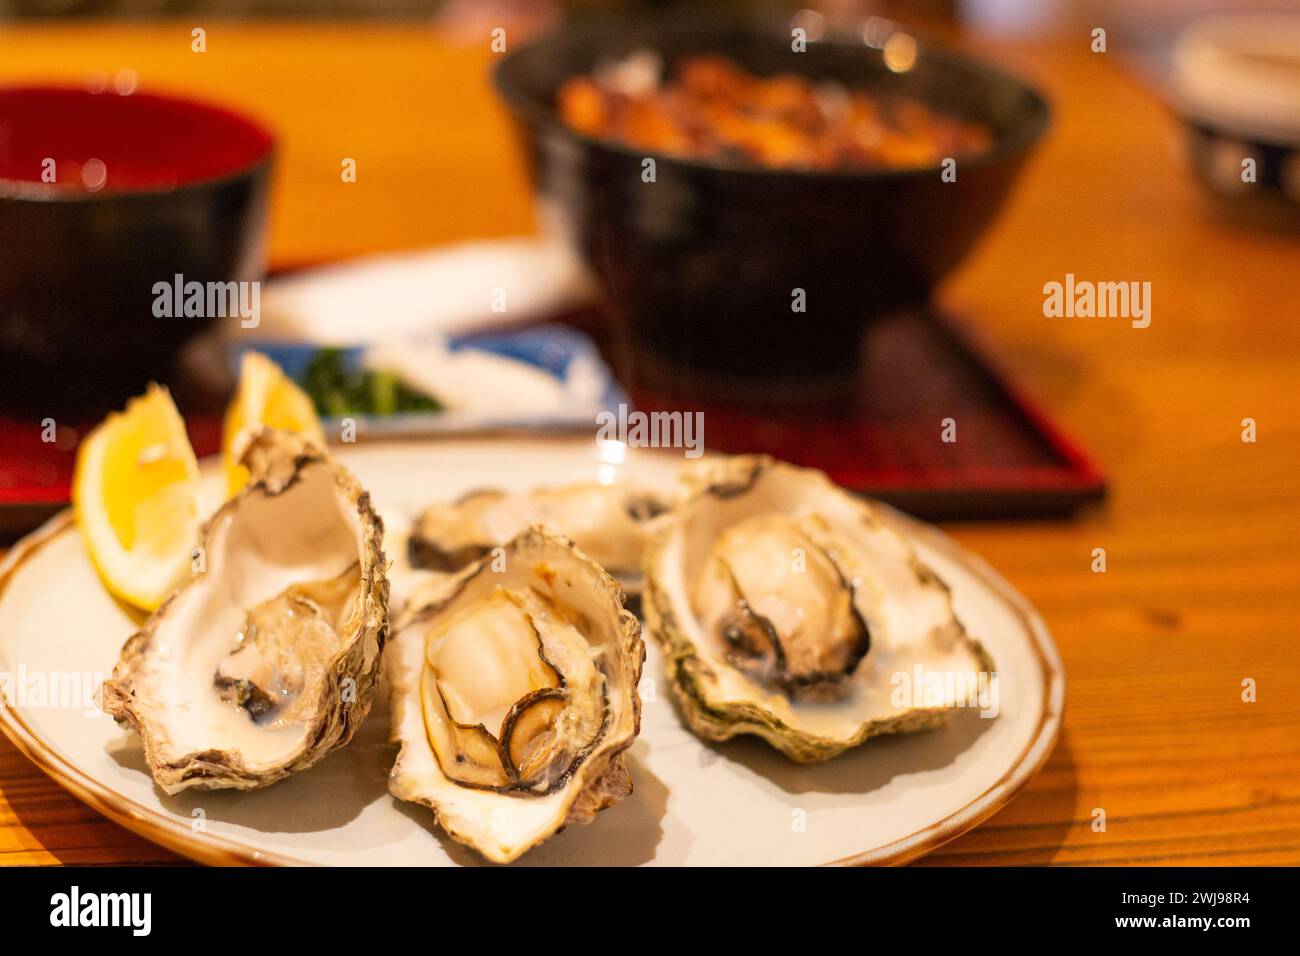 Plate of dlicious grilled oysters served with slices of lemon on table, Hiroshima, Japan, soft focus, selective focus on the front oyster Stock Photo